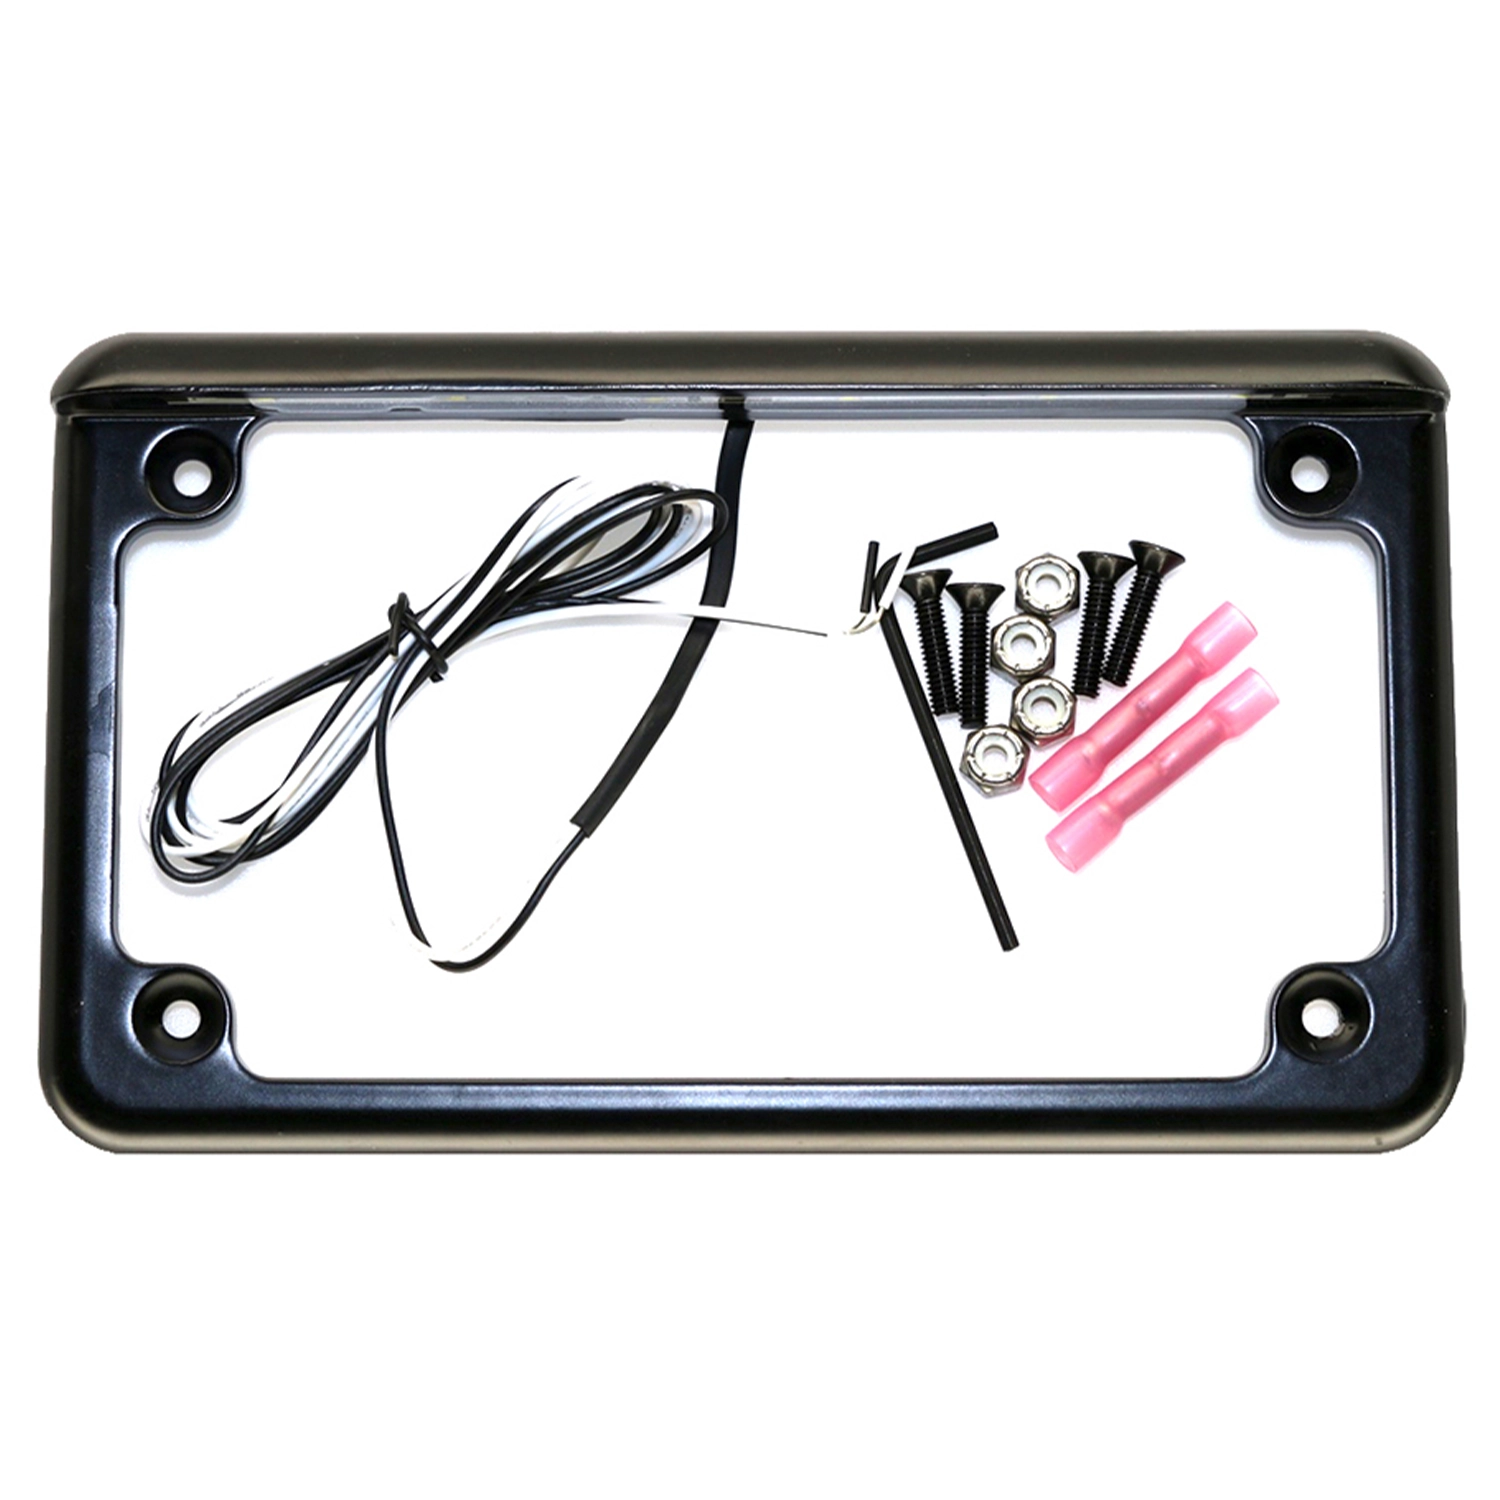 xtc power products utv or motorcycle rear 6 6 led license plate frame black